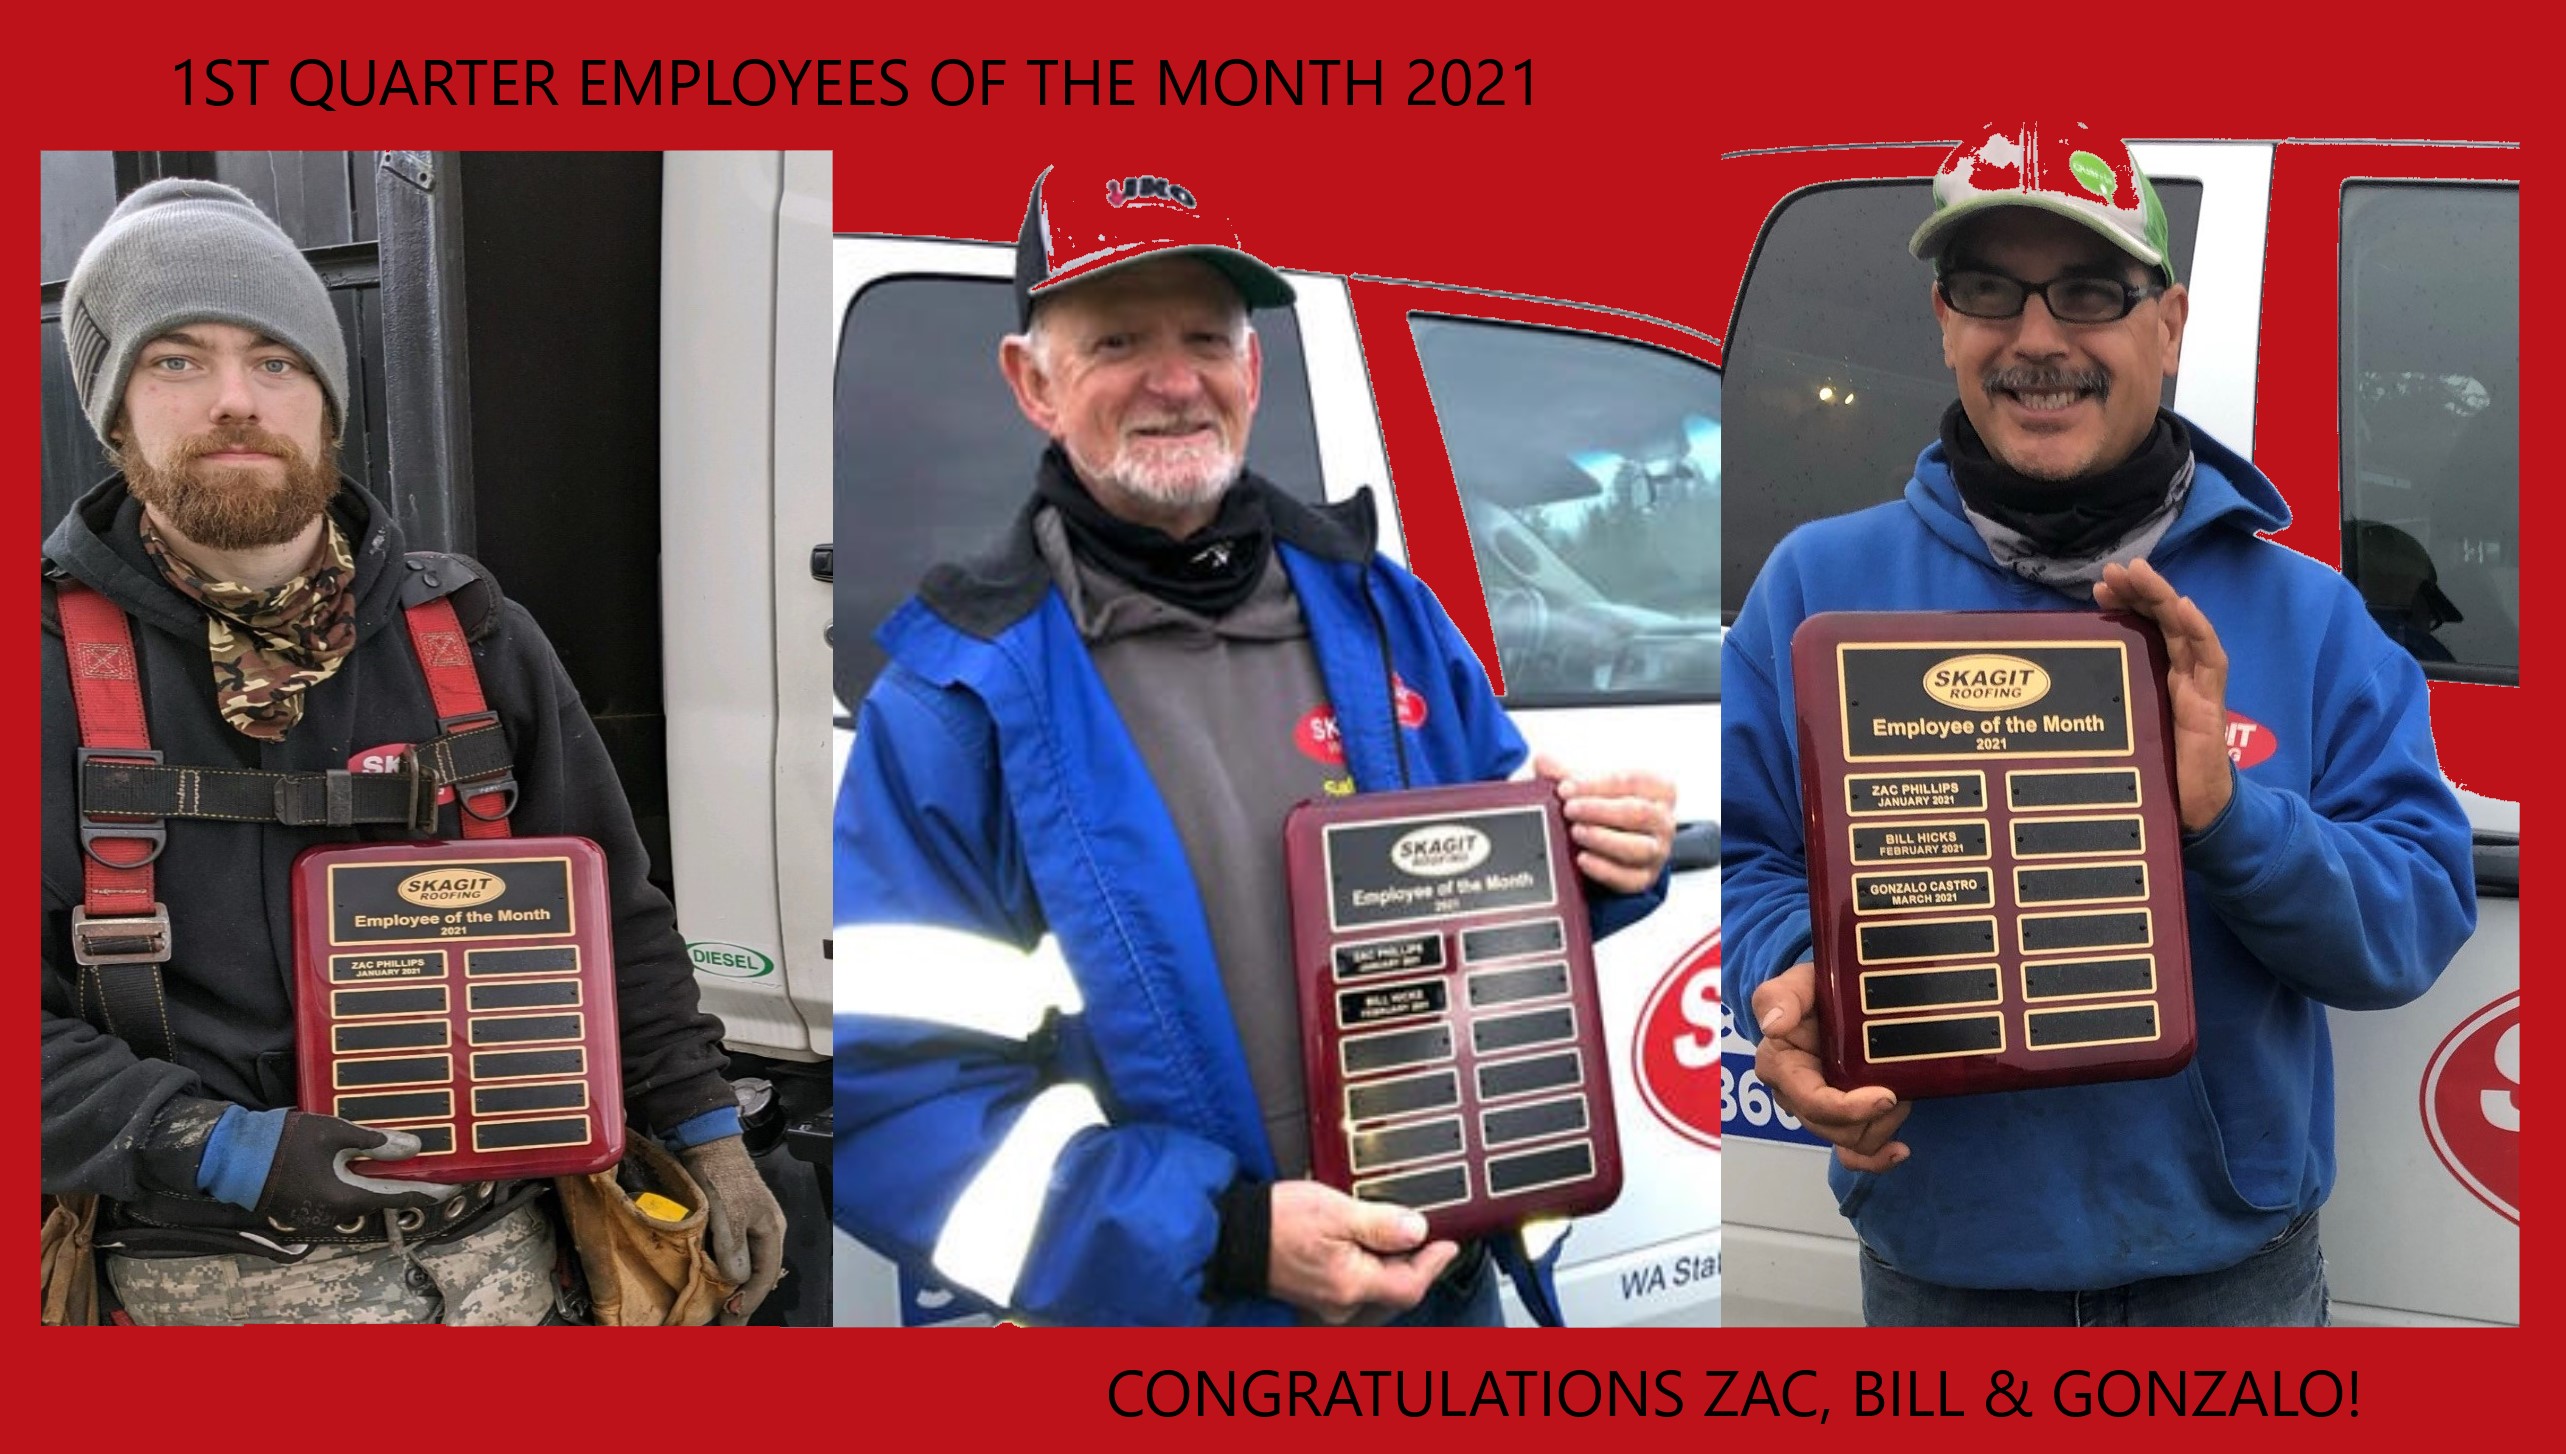 Skagit roofing employees holding up Employee of the Month awards